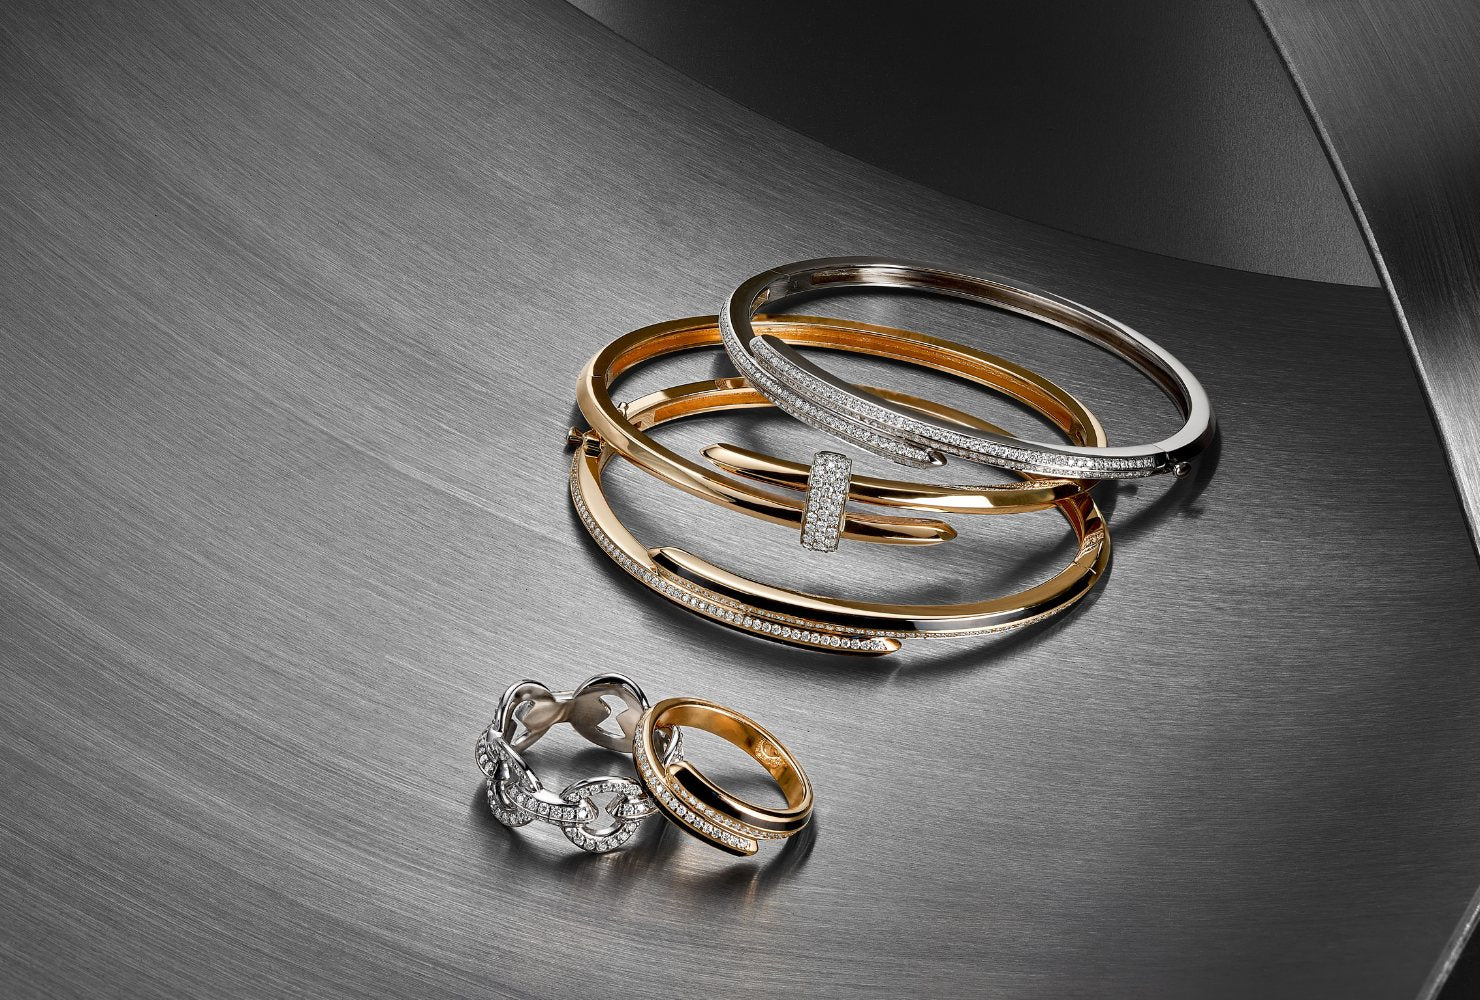 Image of three Ecksand Duel bracelets next to two Ecksand Duel rings on a grey work surface